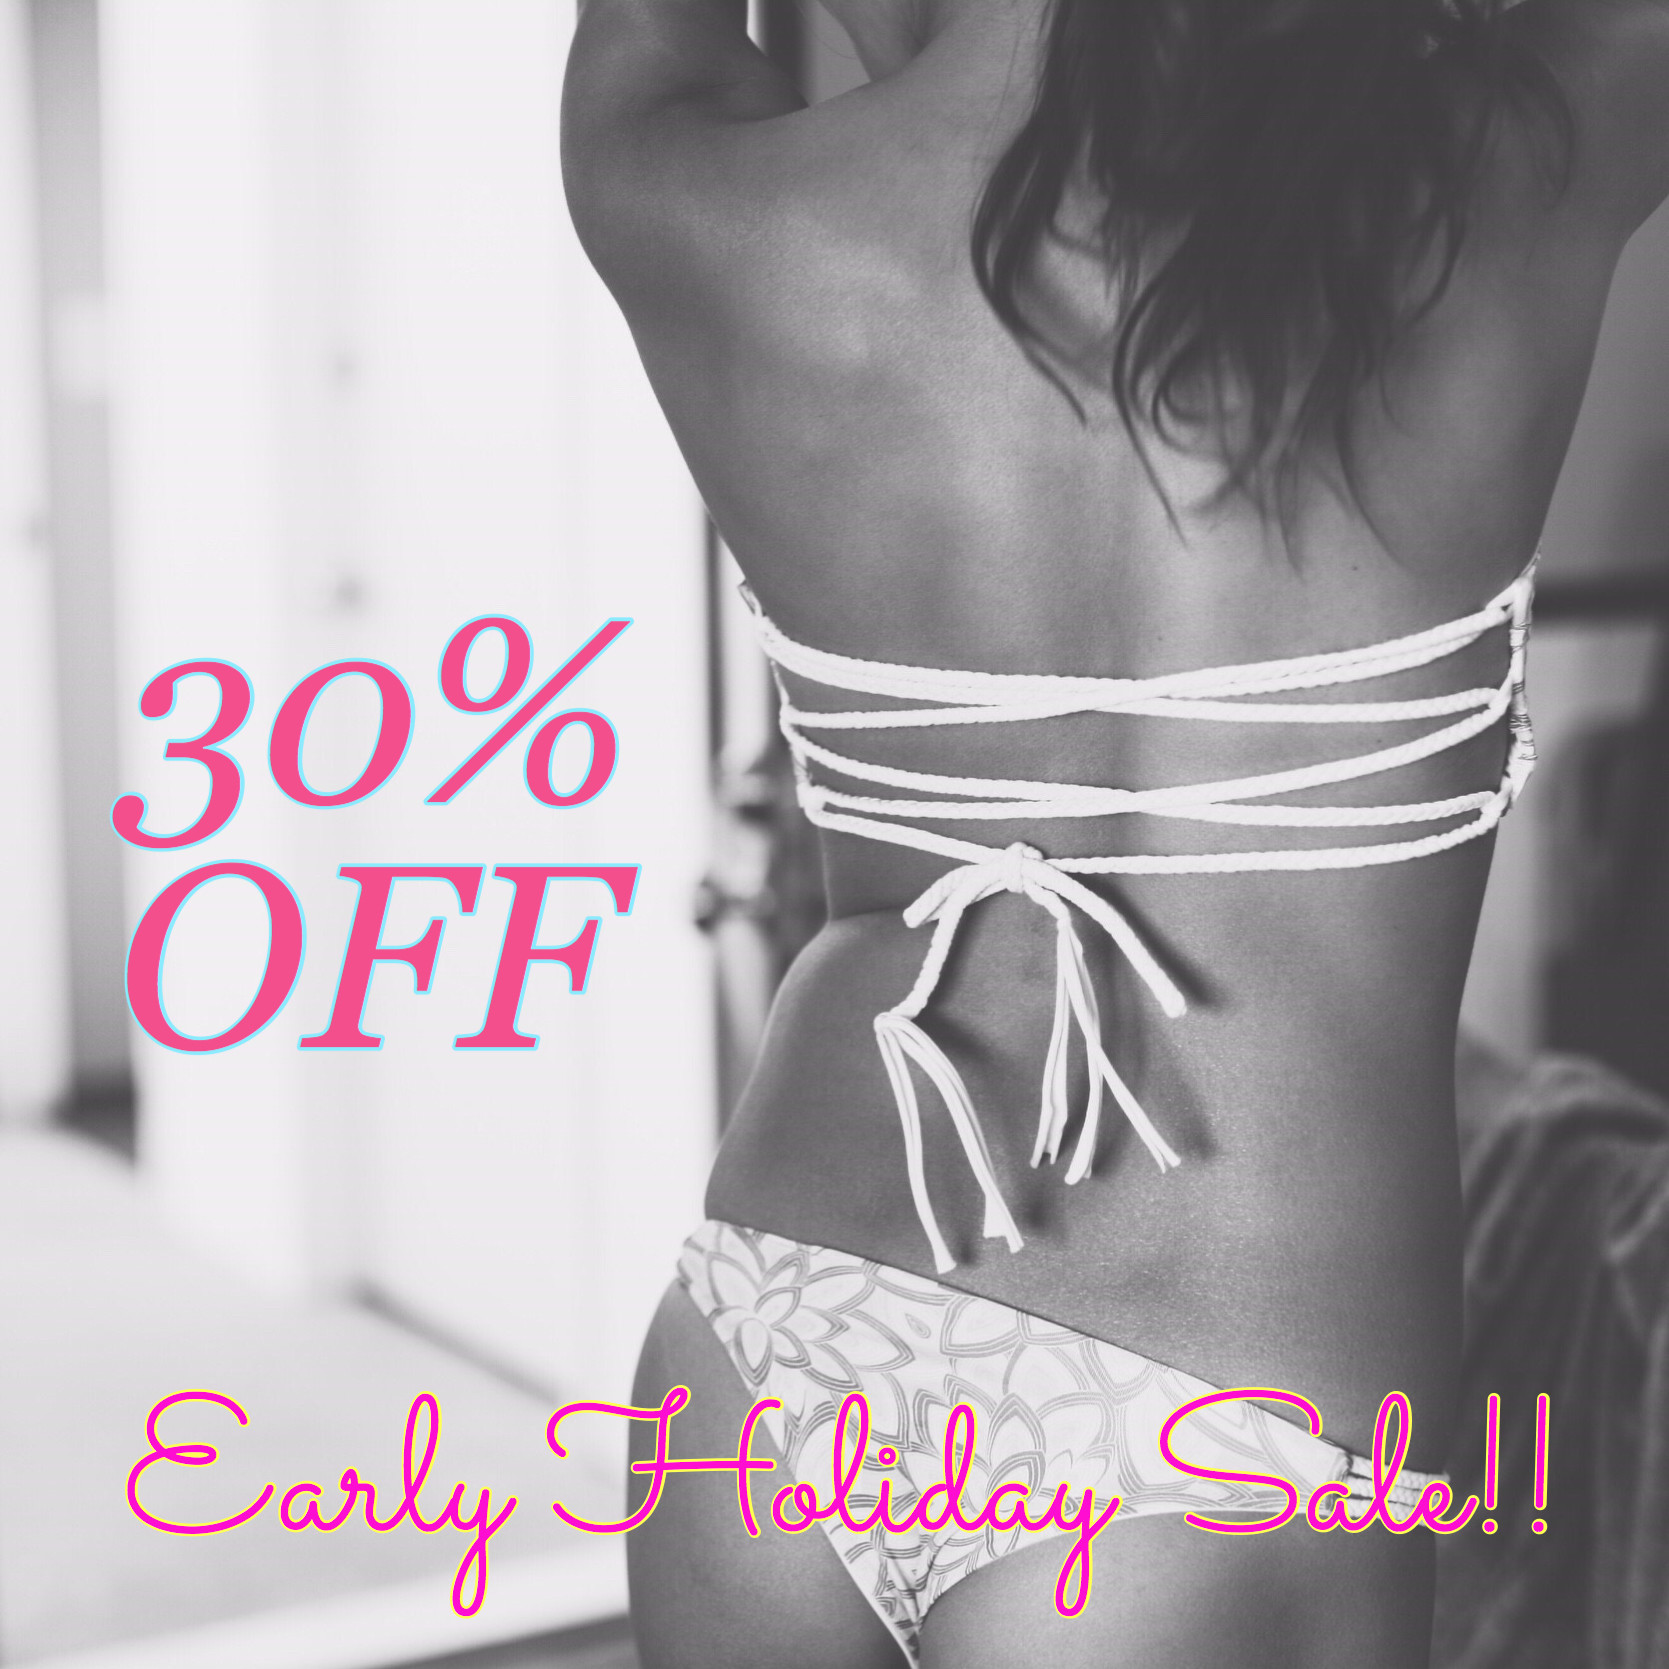 Early Holiday Sale!! GET 30% OFF!!